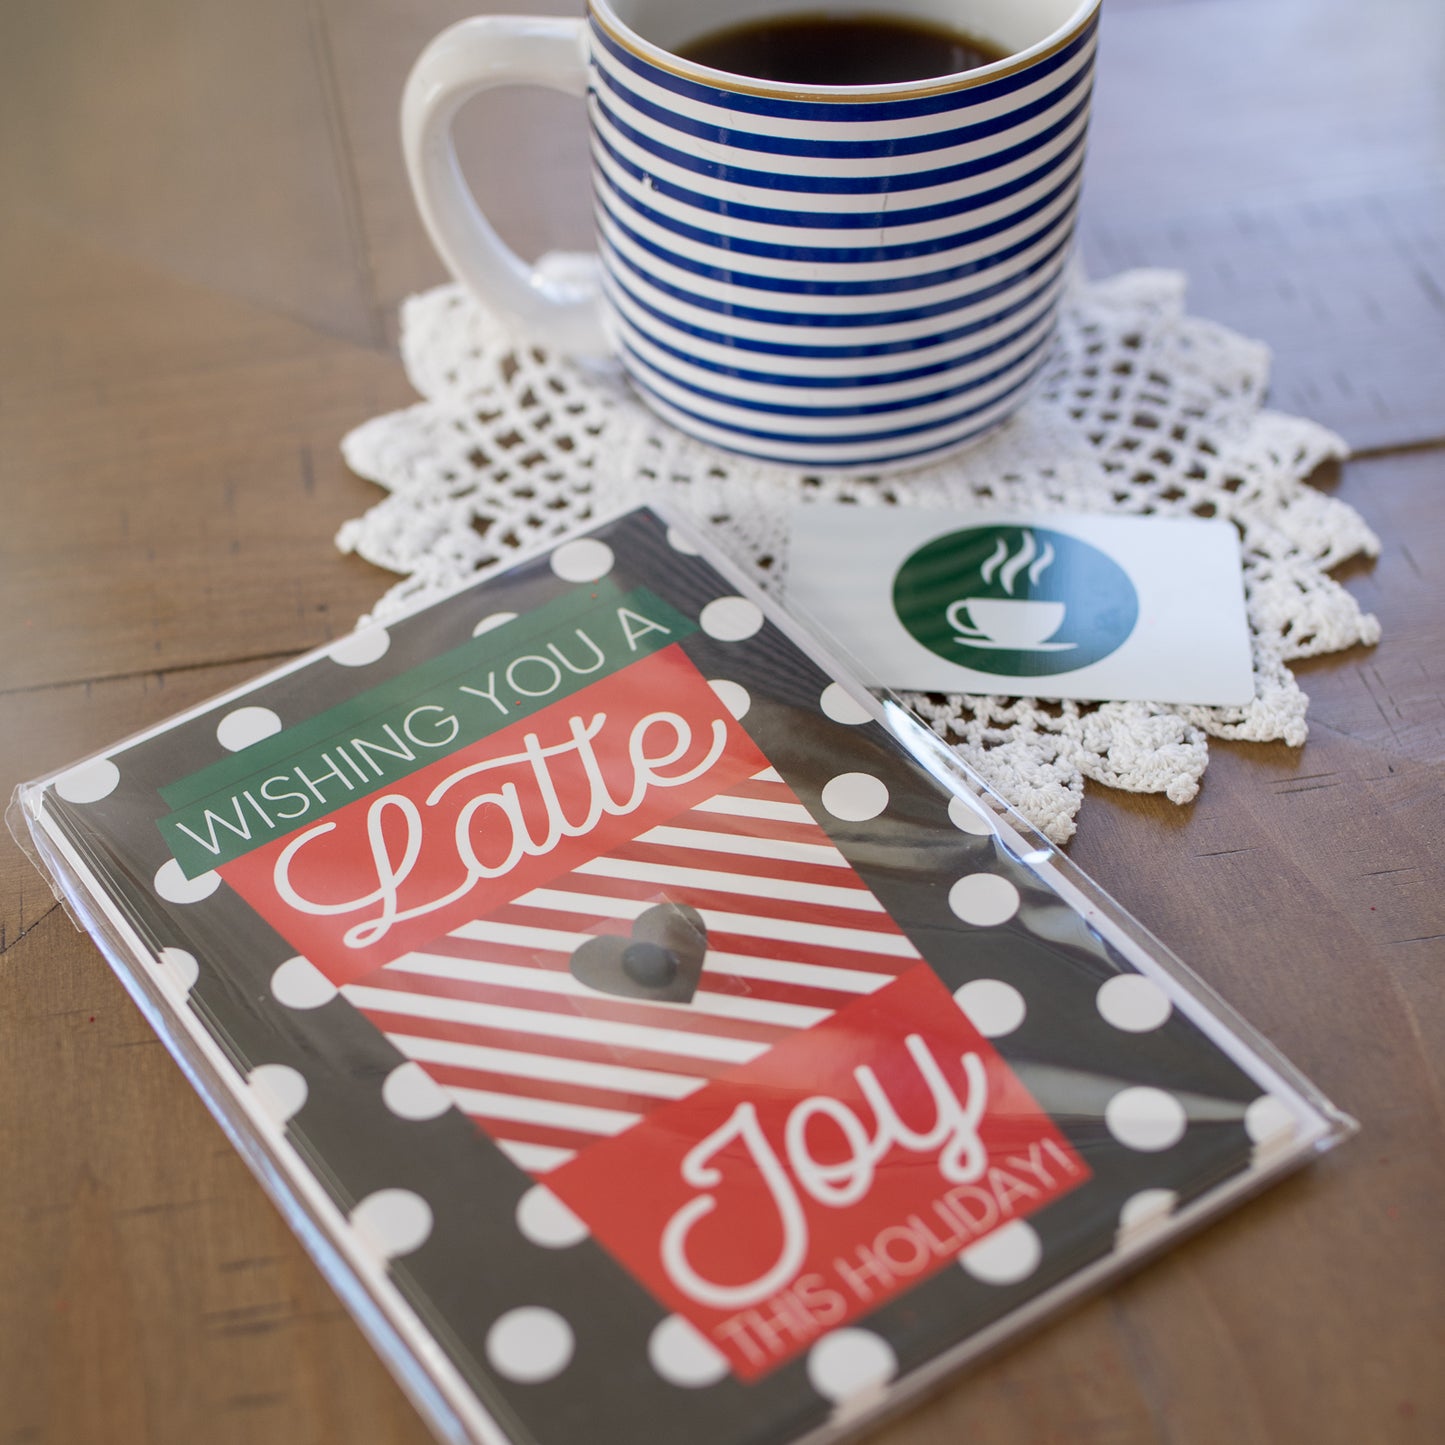 Tiny Expressions – Holiday Coffee Gift Card Holders (4 Pack) | Christmas Set of 4 with Envelopes | Thanks a Latte Themed 5"x7" Appreciation Gifts for Teachers, Staff, Nurses, Customers & Admins